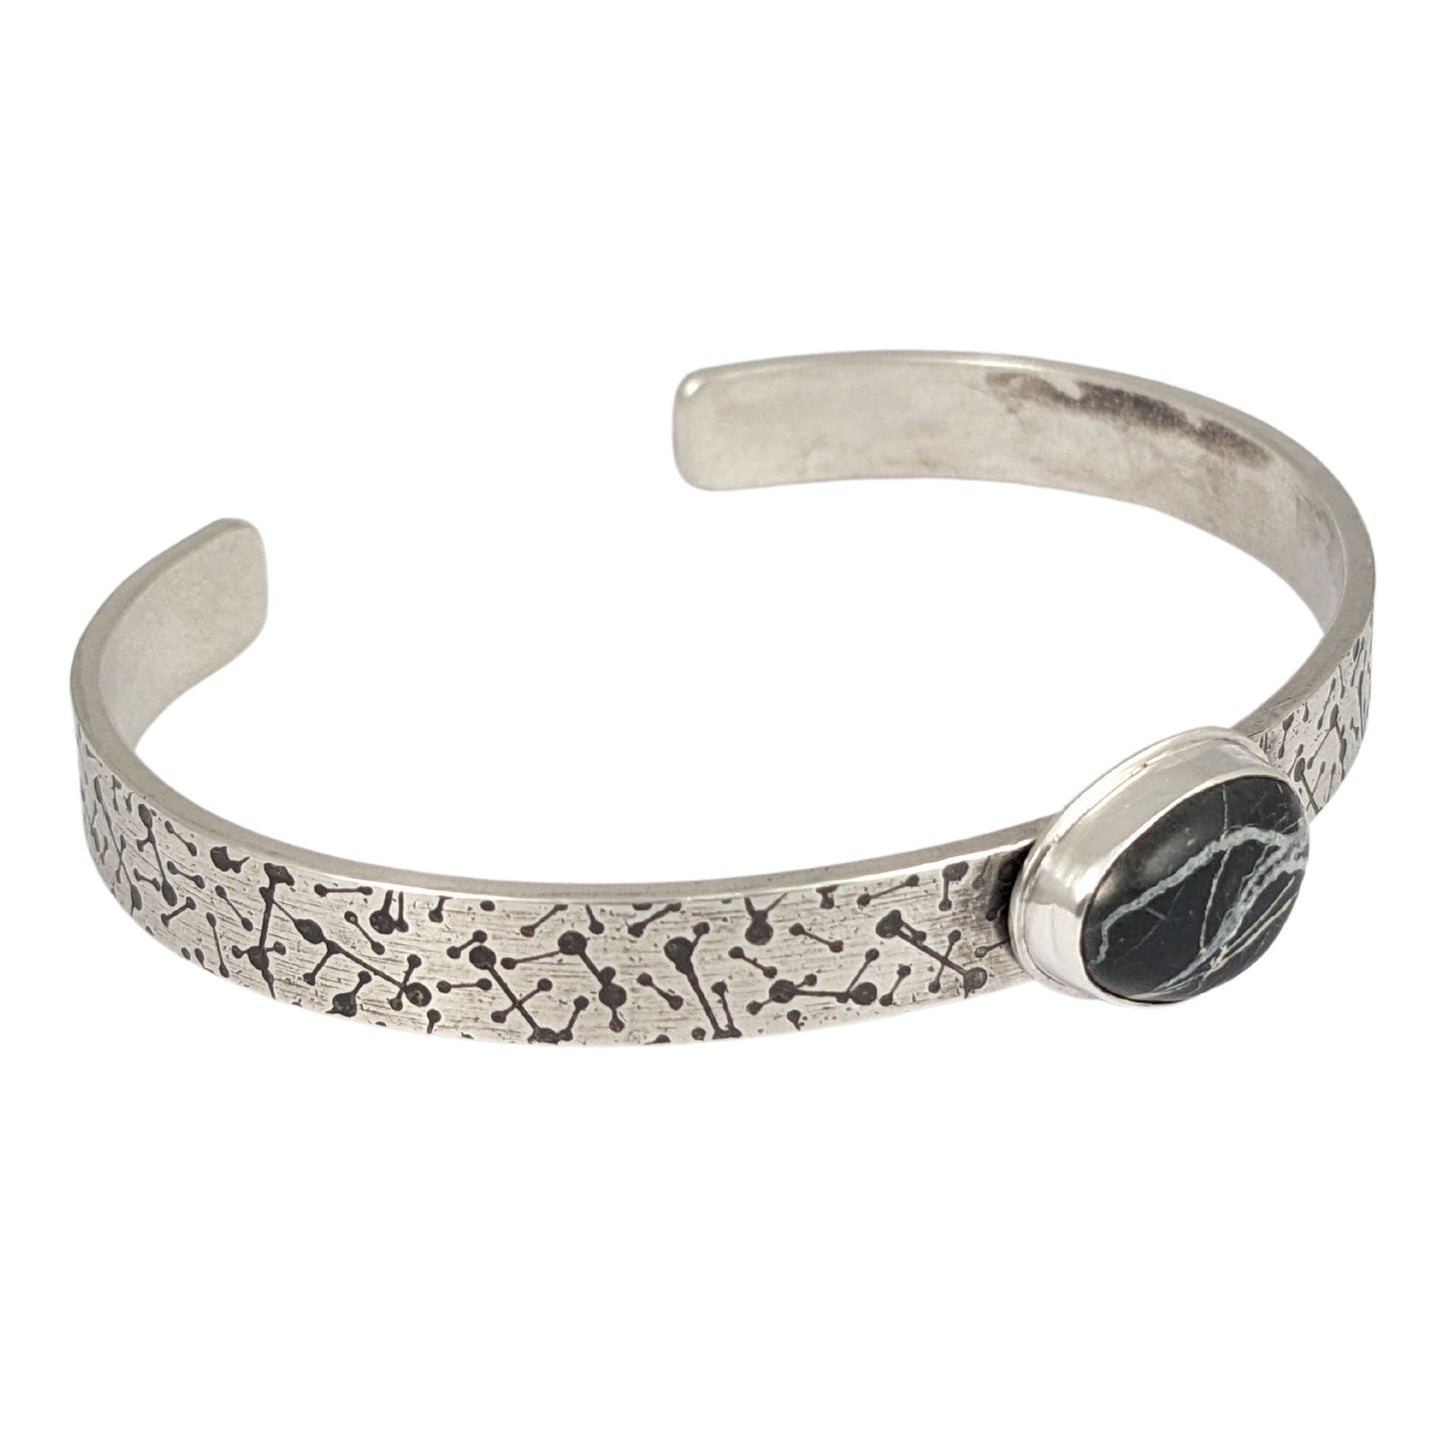 8 millimeter wide sterling silver cuff bracelet. The silver is covered in short lines with small dots on the ends that represent meteor showers. On the center is a freeform oval shaped white buffalo stone, which is a black stone with random streaks of white running through it.